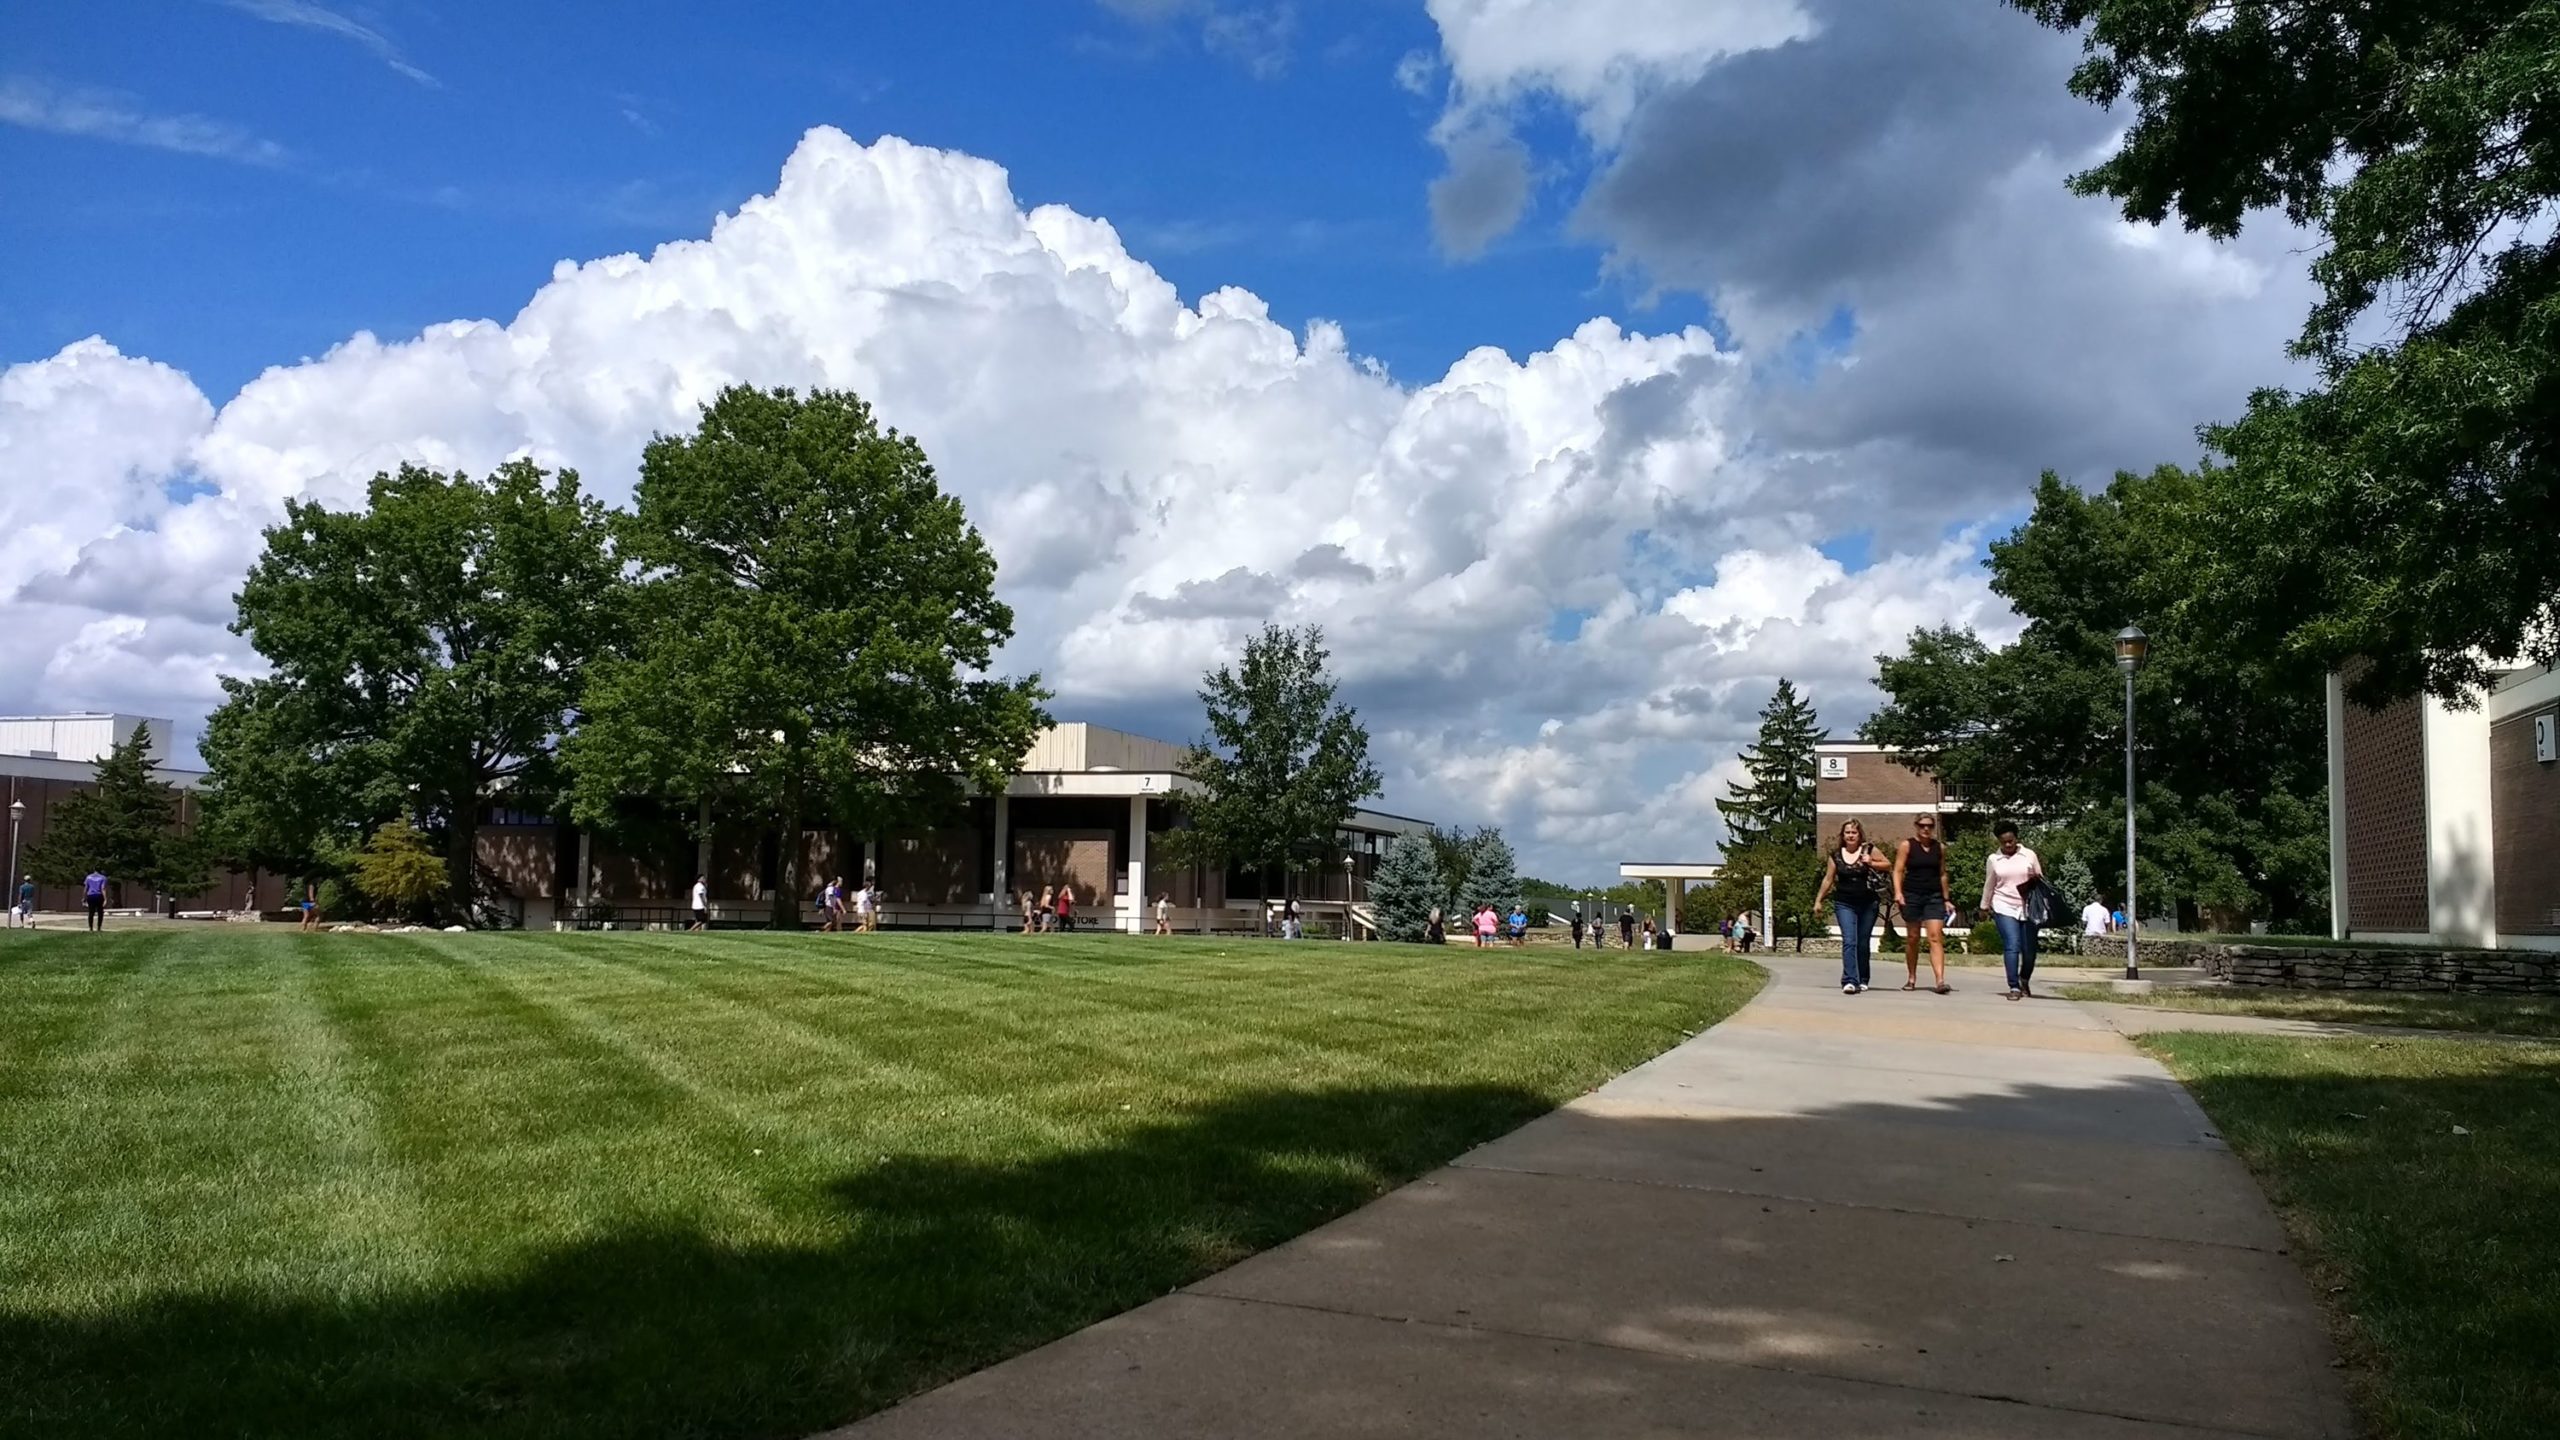 Wide view of the campus Quad with students walking along the sidewalks